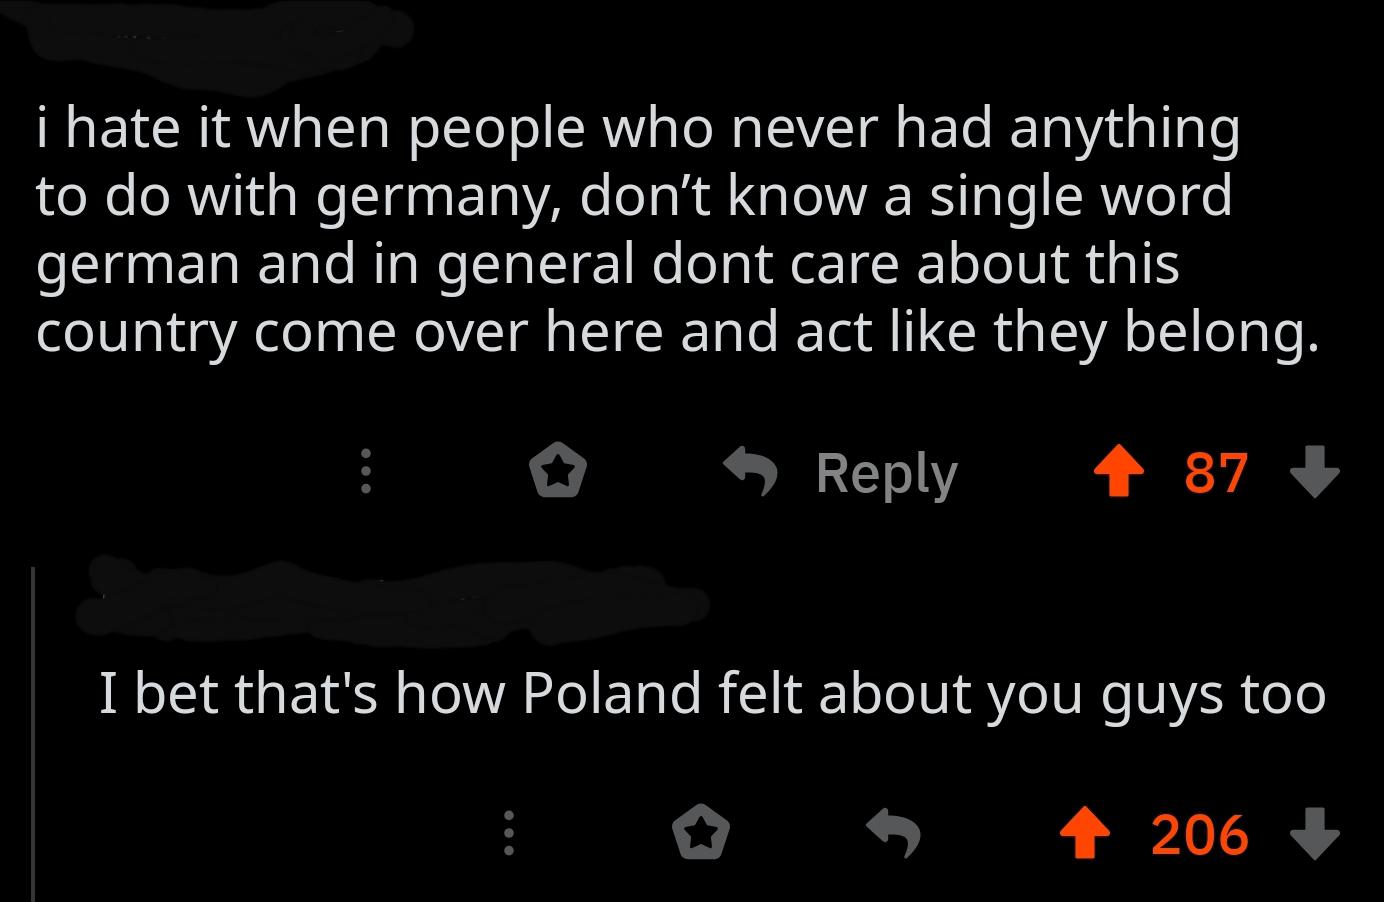 atmosphere - i hate it when people who never had anything to do with germany, don't know a single word german and in general dont care about this country come over here and act they belong. 5 487 I bet that's how Poland felt about you guys too 206